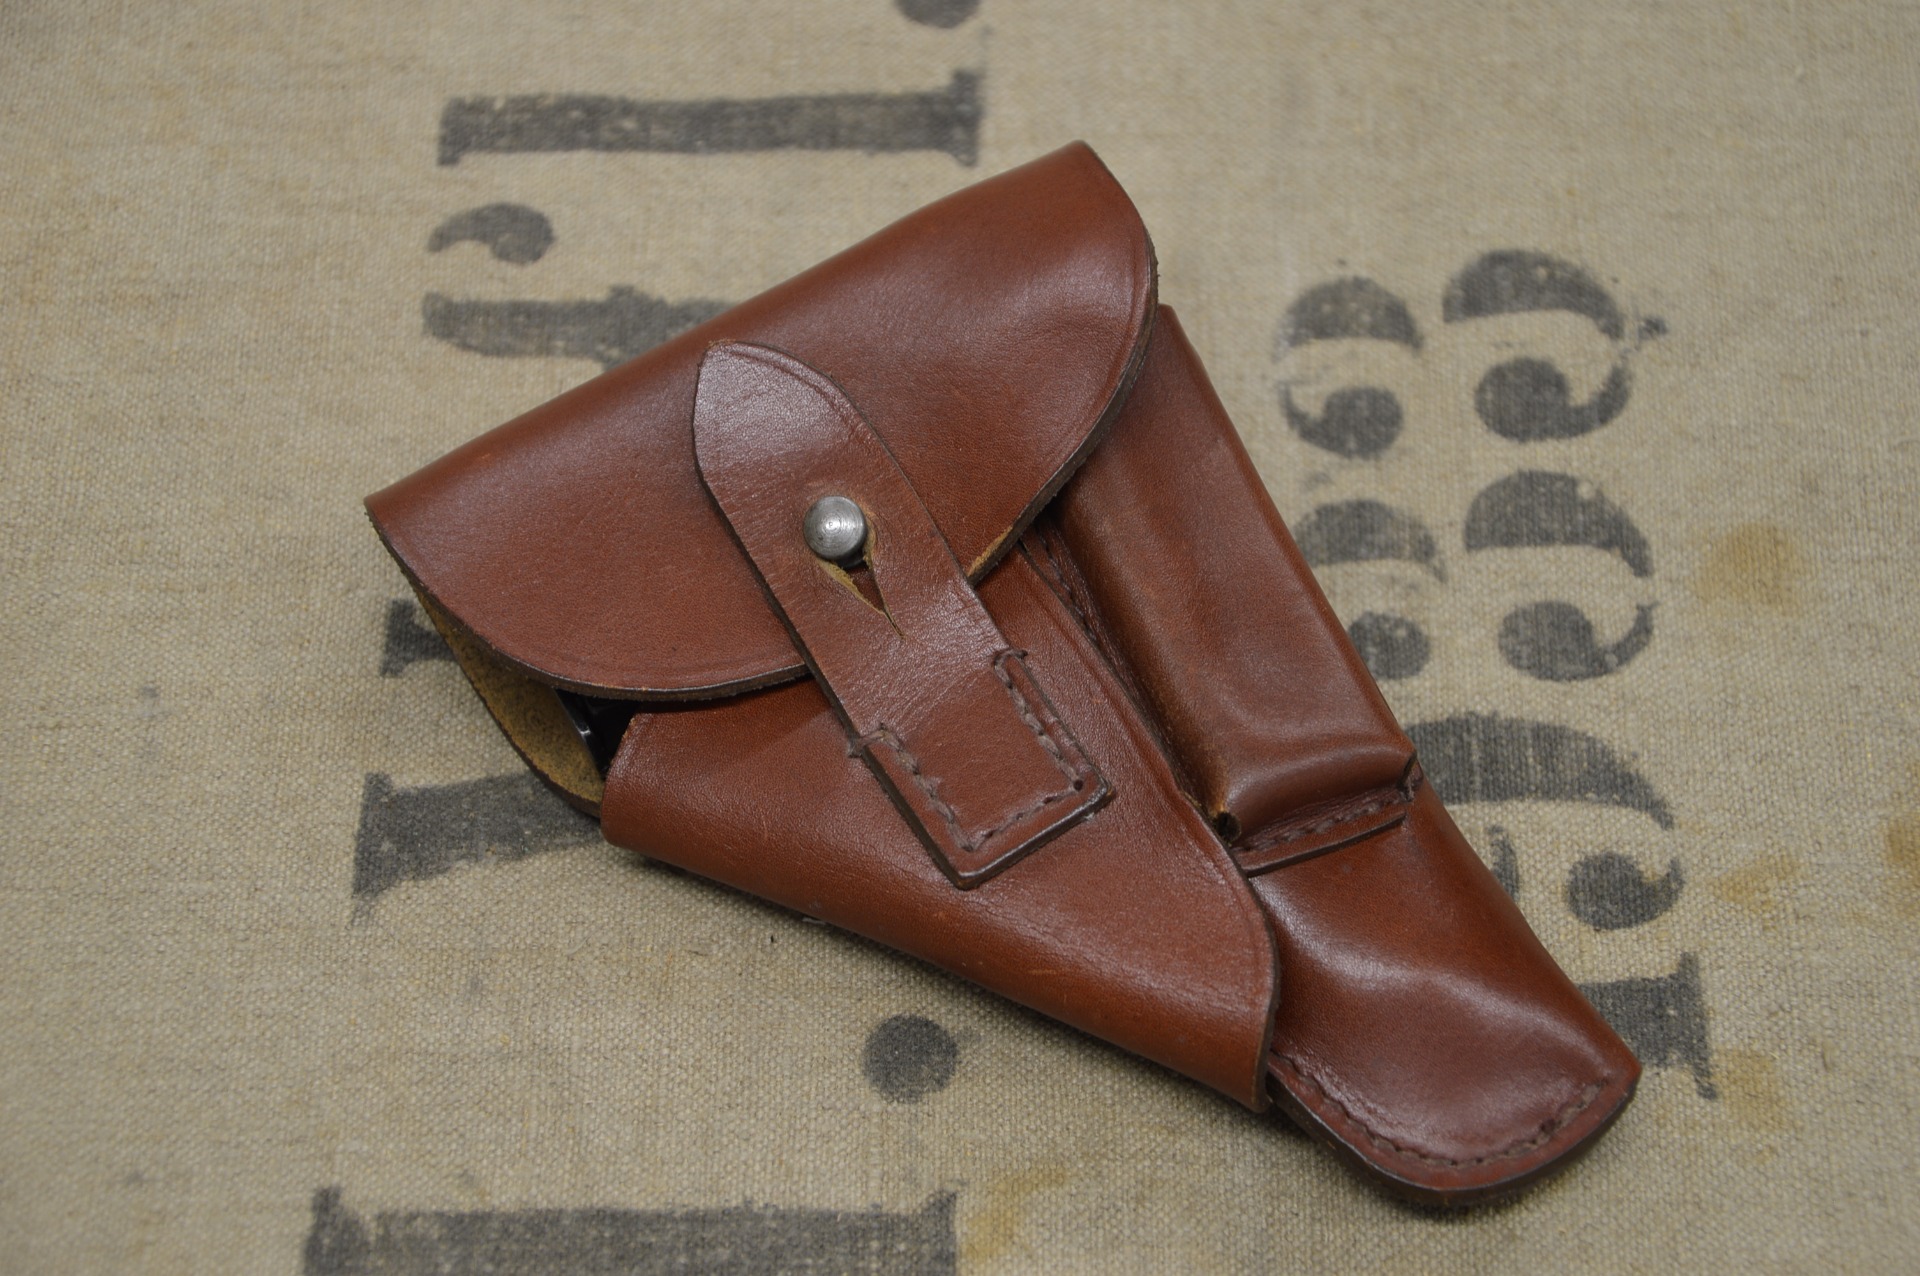 WW2 German Canvas holster for Walther PPK  Free shipping from the USA